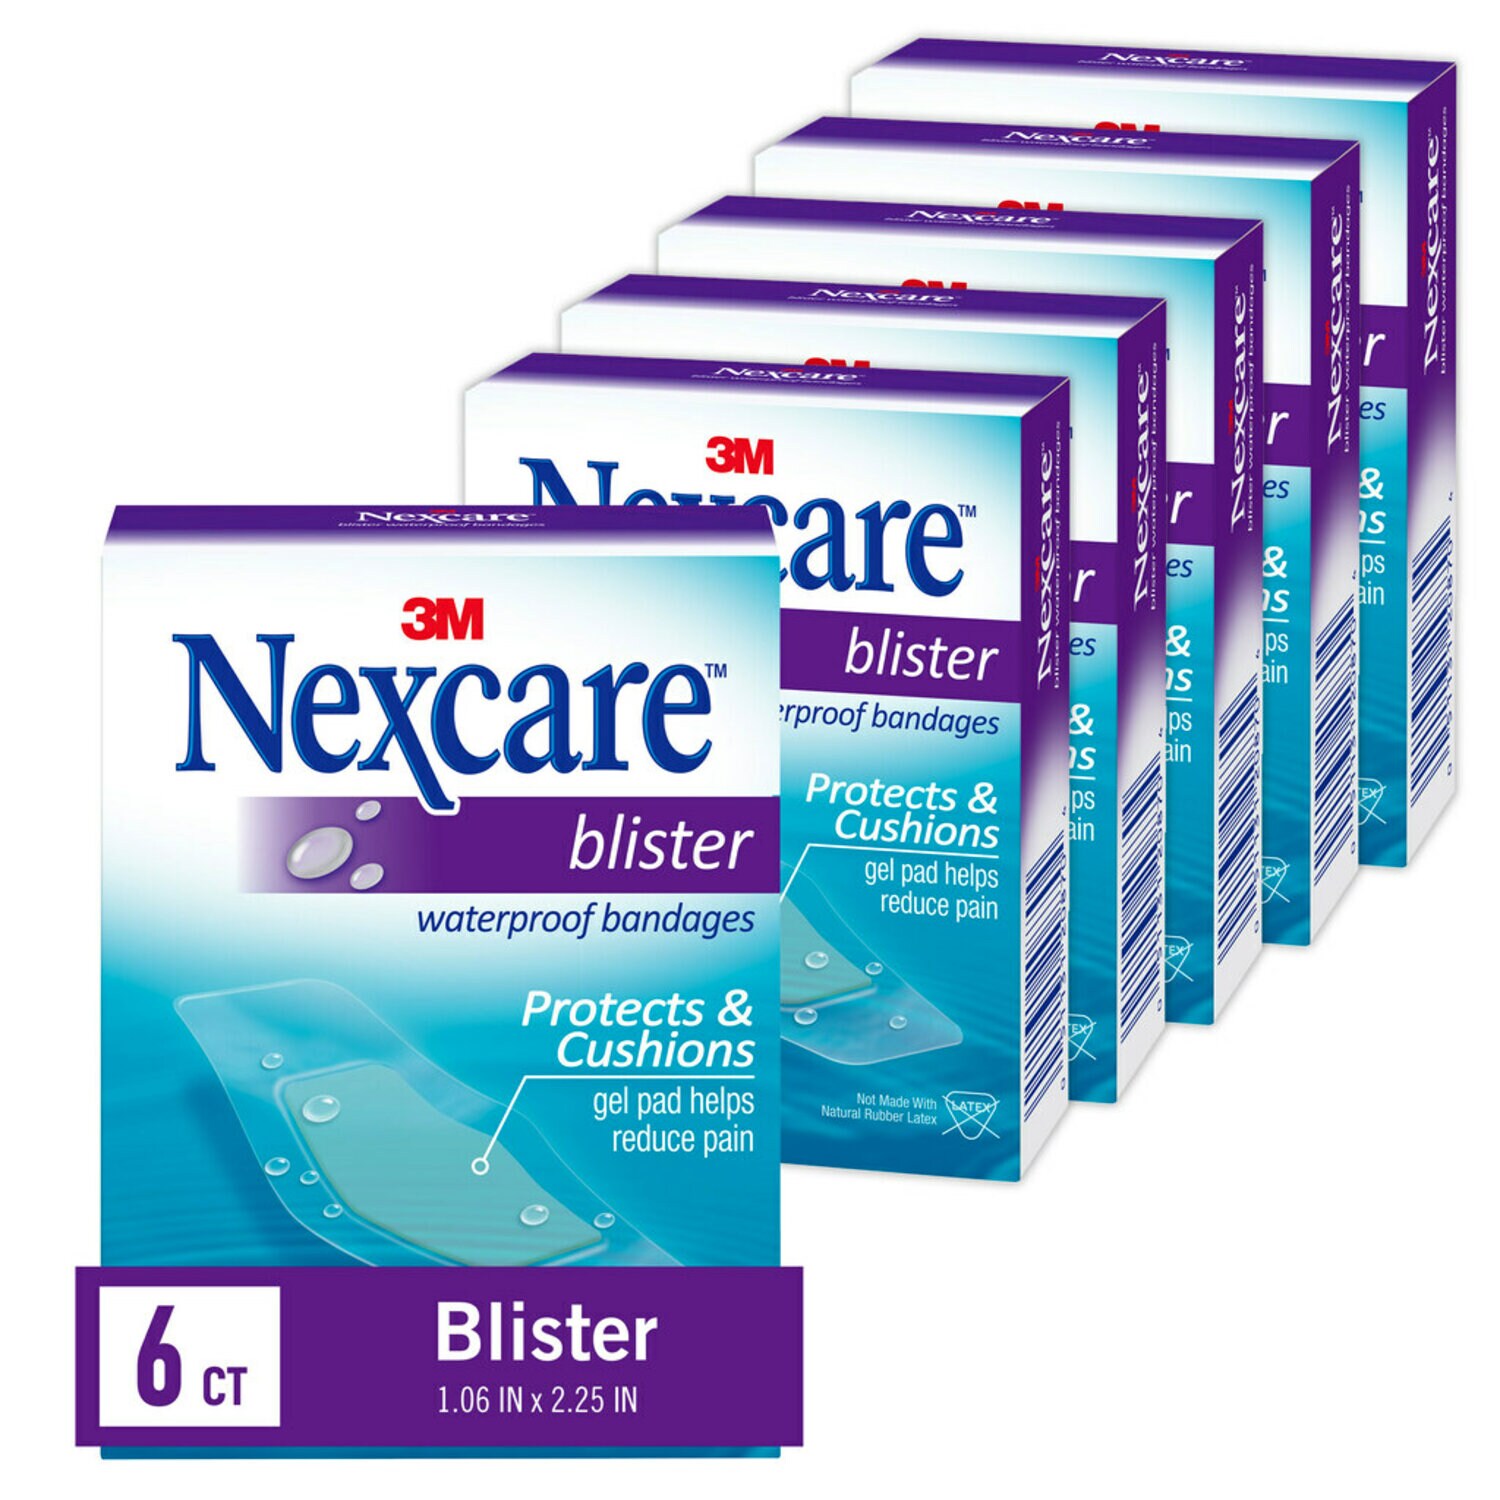 7100045229 - Nexcare Blister Waterproof Bandages BWB-06, 1 1/16 in x 2 1/4 in